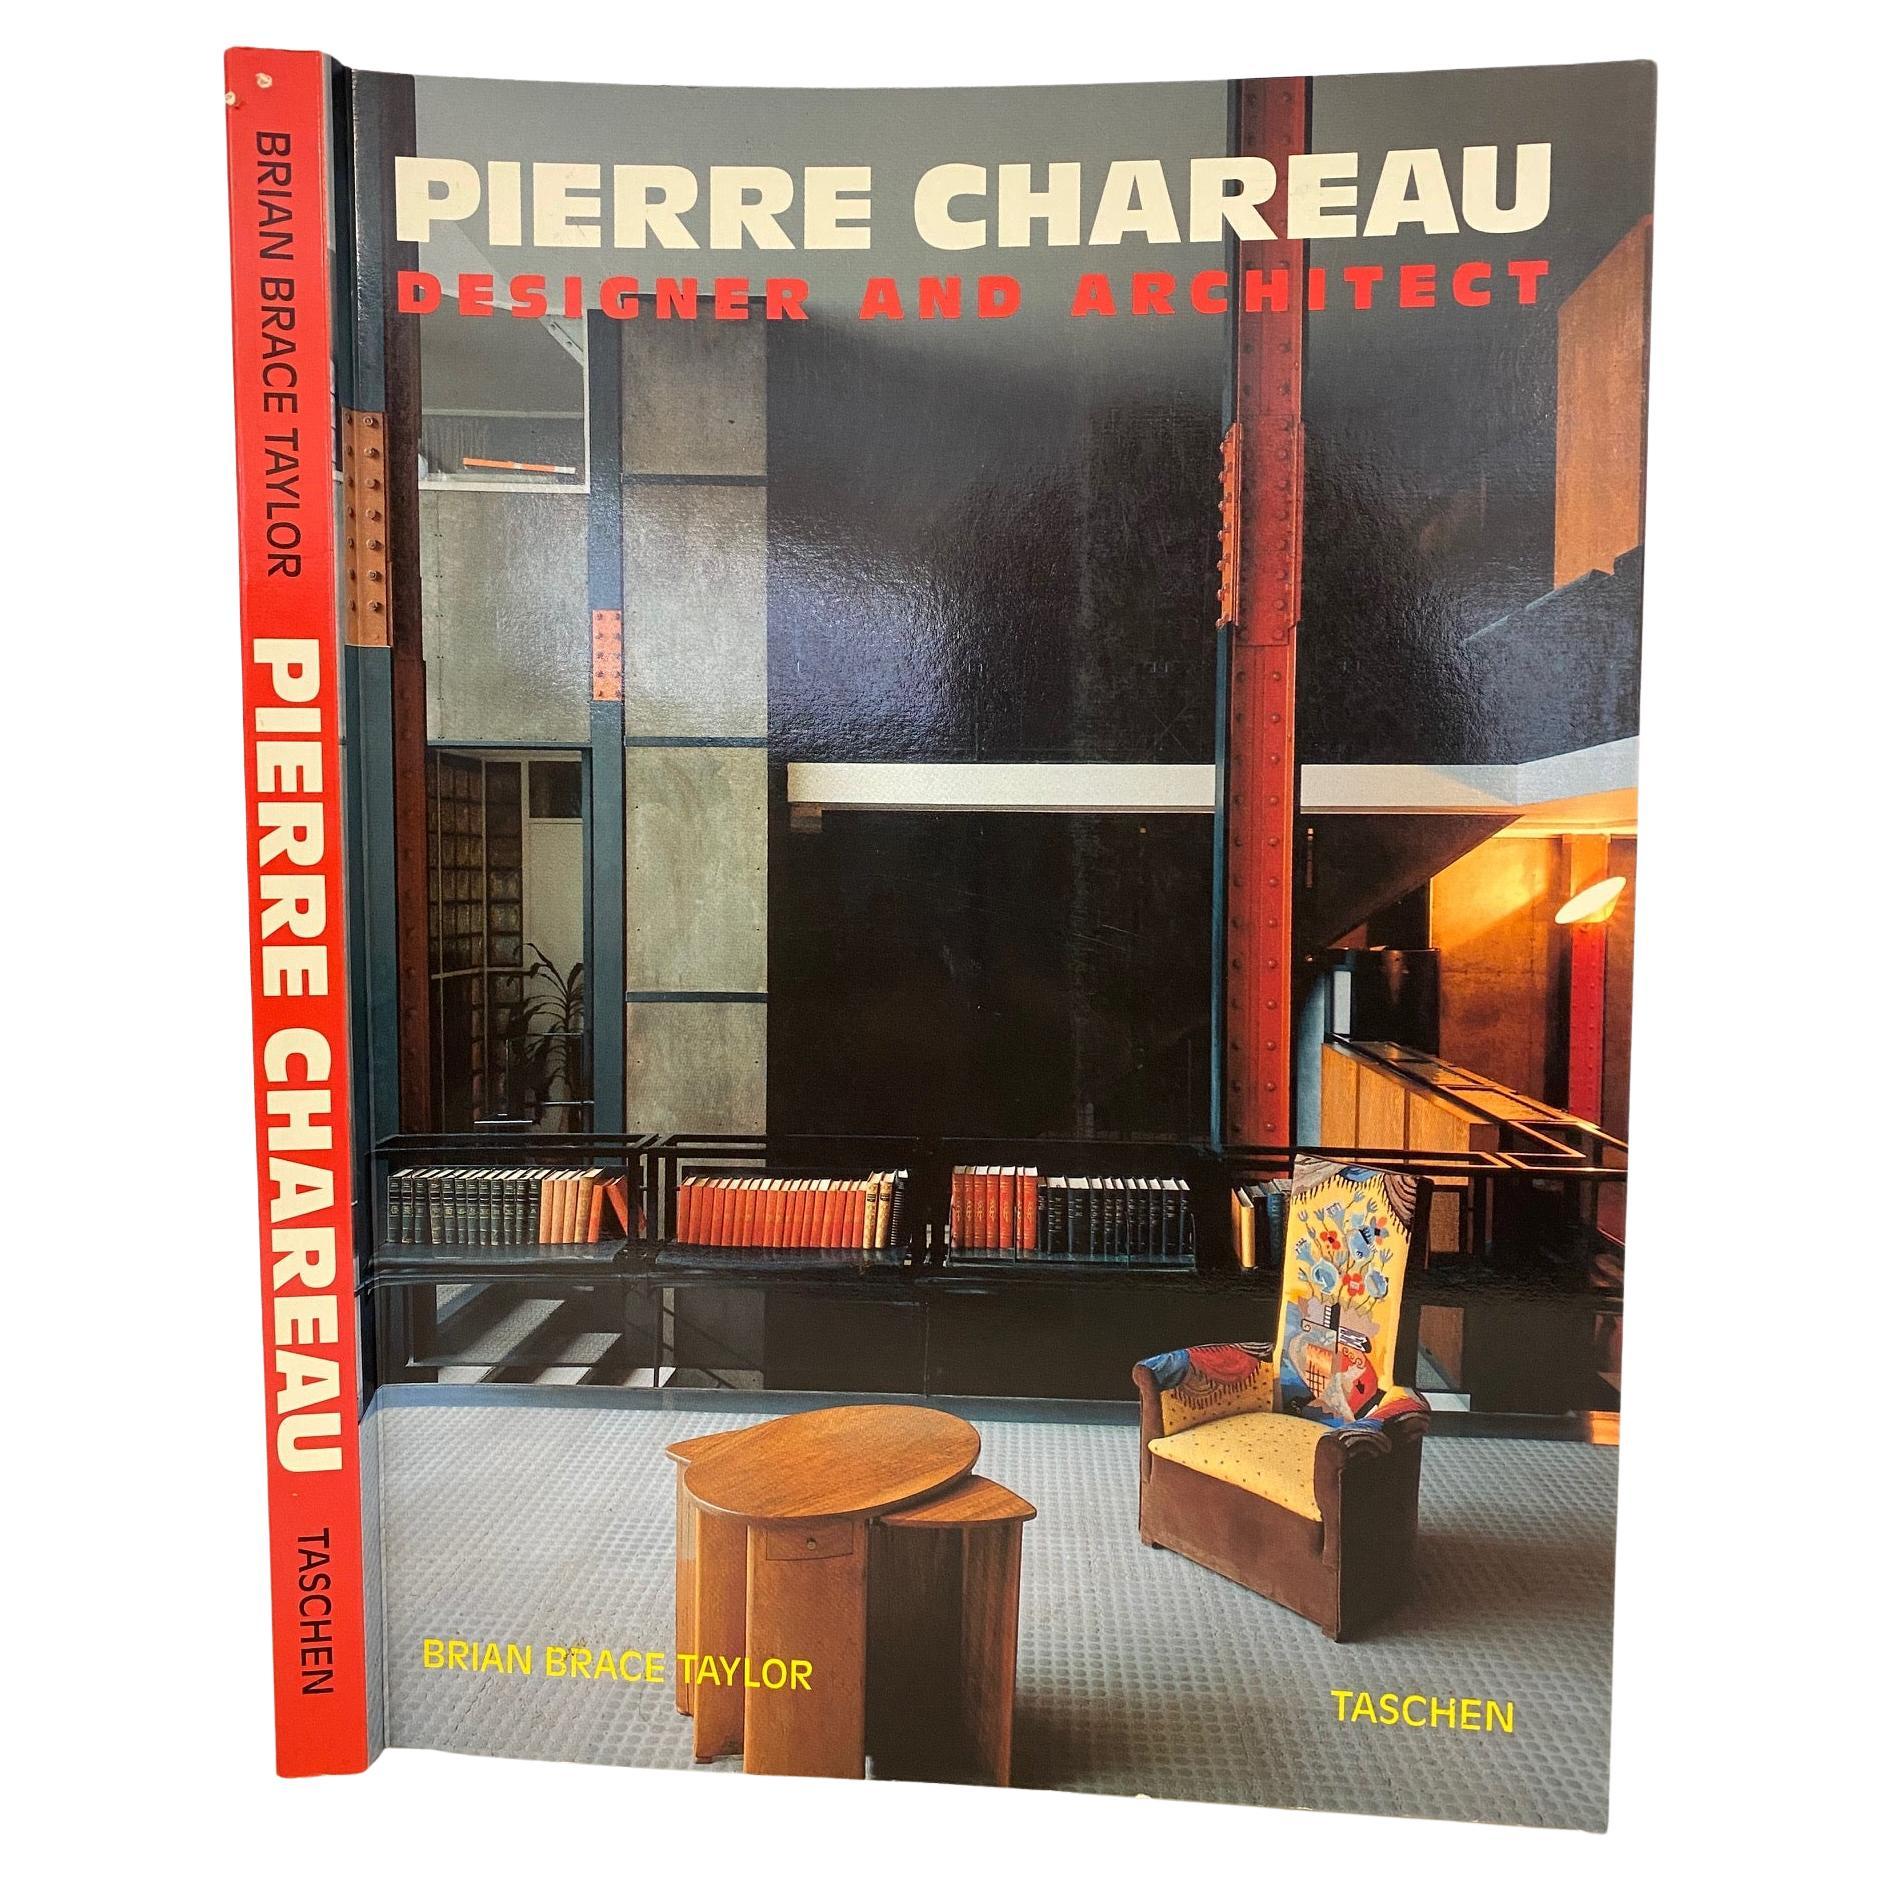 Pierre Chareau, Designer and Architect by Brian Brace Taylor (Book)